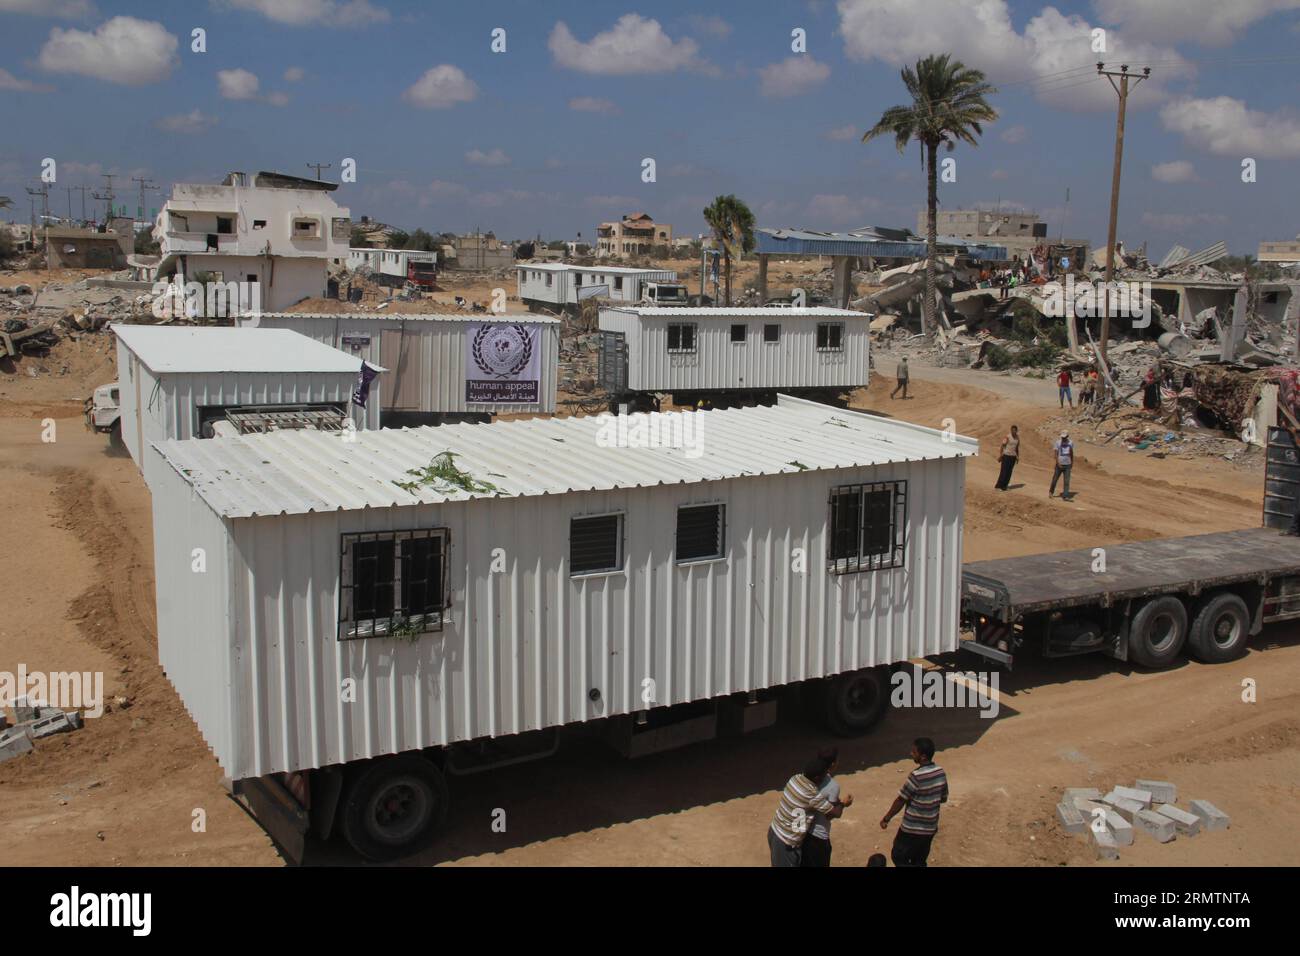 Mobile homes donated by an United Arab Emirates association are delivered to Palestinian families whose houses were destroyed by bombings during the Israeli offensive on the Gaza Strip, in Khuzaa neighborhood in the southern Gaza Strip City of Khan Younis, on Sept. 13, 2014. Some 60,000 homes were impacted during the 50-day Israeli offensive, a third of which became uninhabitable. ) MIDEAST-GAZA-MOBILE HOMES KhaledxOmar PUBLICATIONxNOTxINxCHN   Mobile Homes Donated by to United Arab Emirates Association are delivered to PALESTINIAN families whose Houses Were destroyed by bombings during The Is Stock Photo